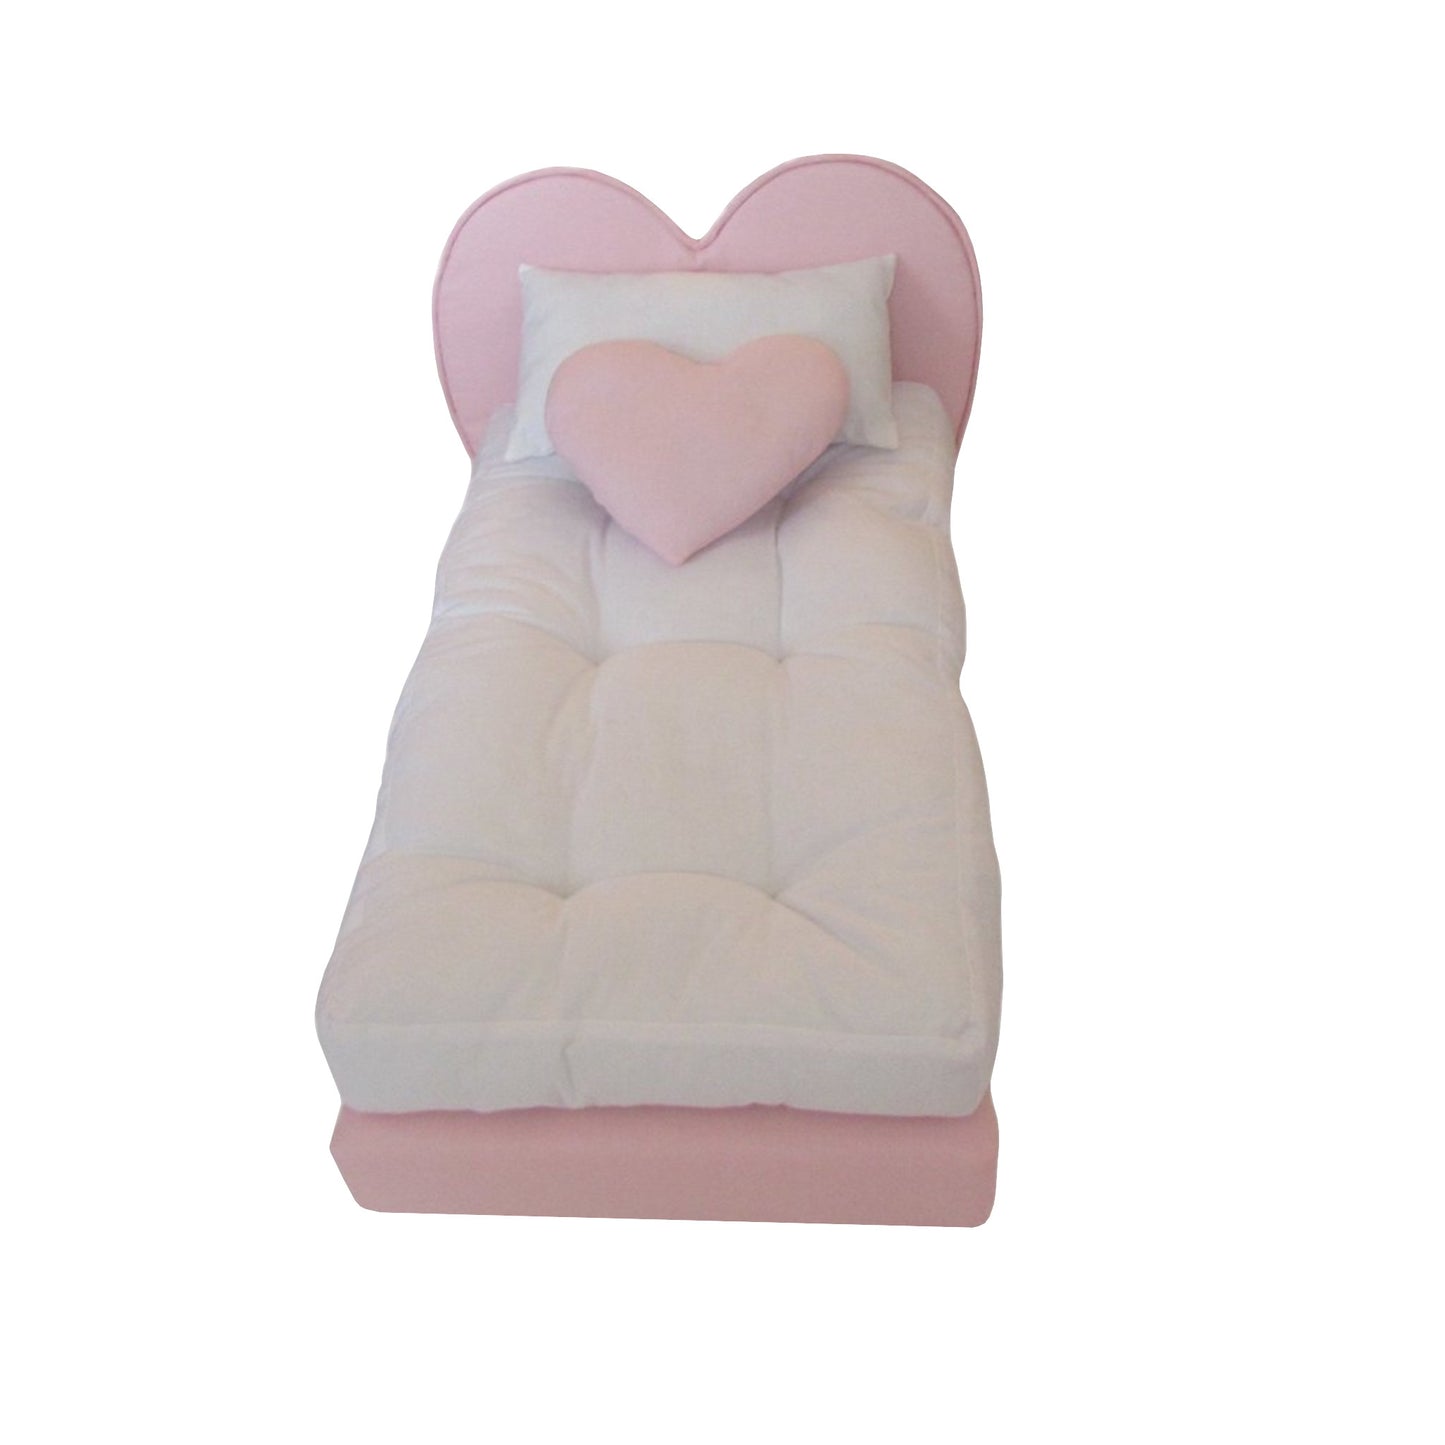 Upholstered Pink Heart Doll Bed for 18-inch dolls with pillows